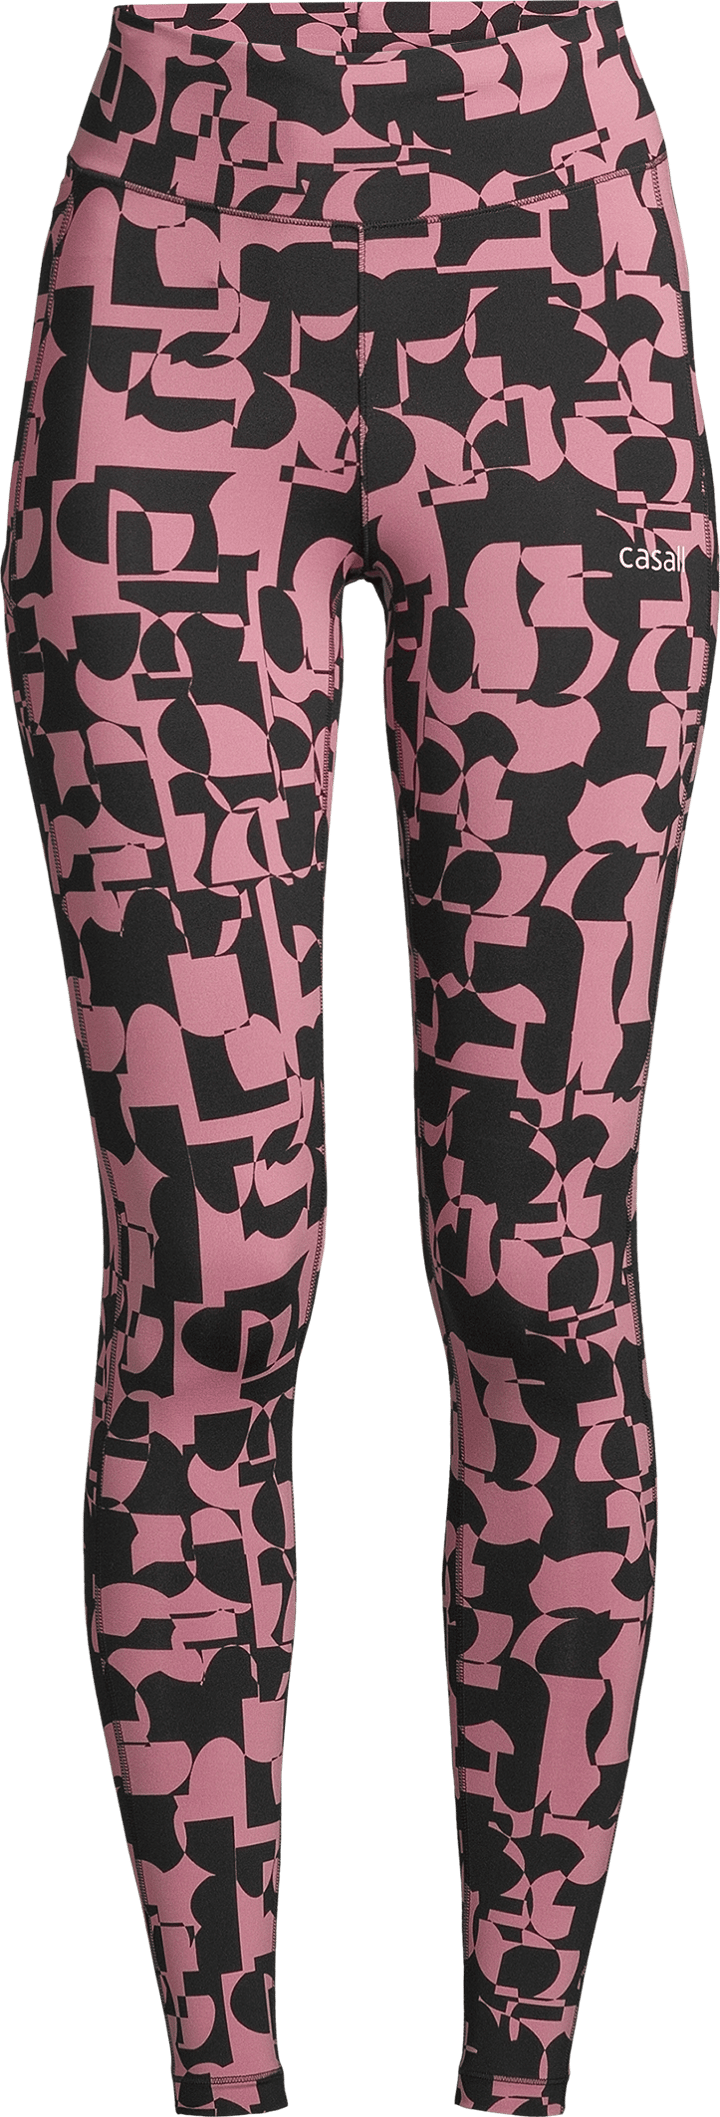 Women's Iconic Printed 7/8 Tights Echo Pink Casall